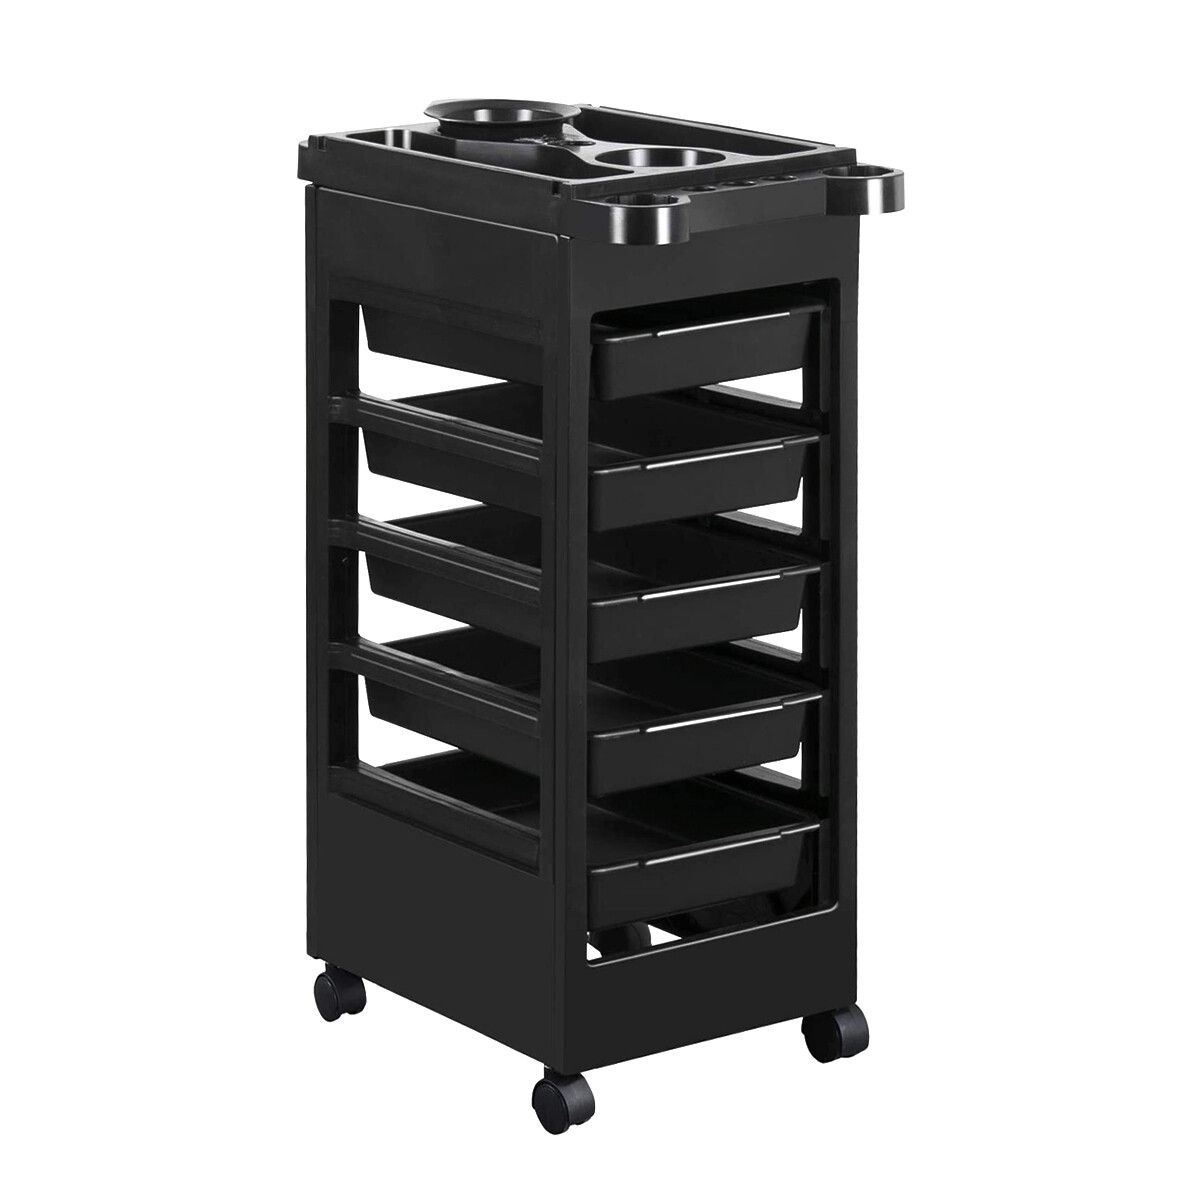 Hairdressing Trolley Storage Rolling Tool Cart Salon Furniture on Wheels 6 Tiers 5 Tray